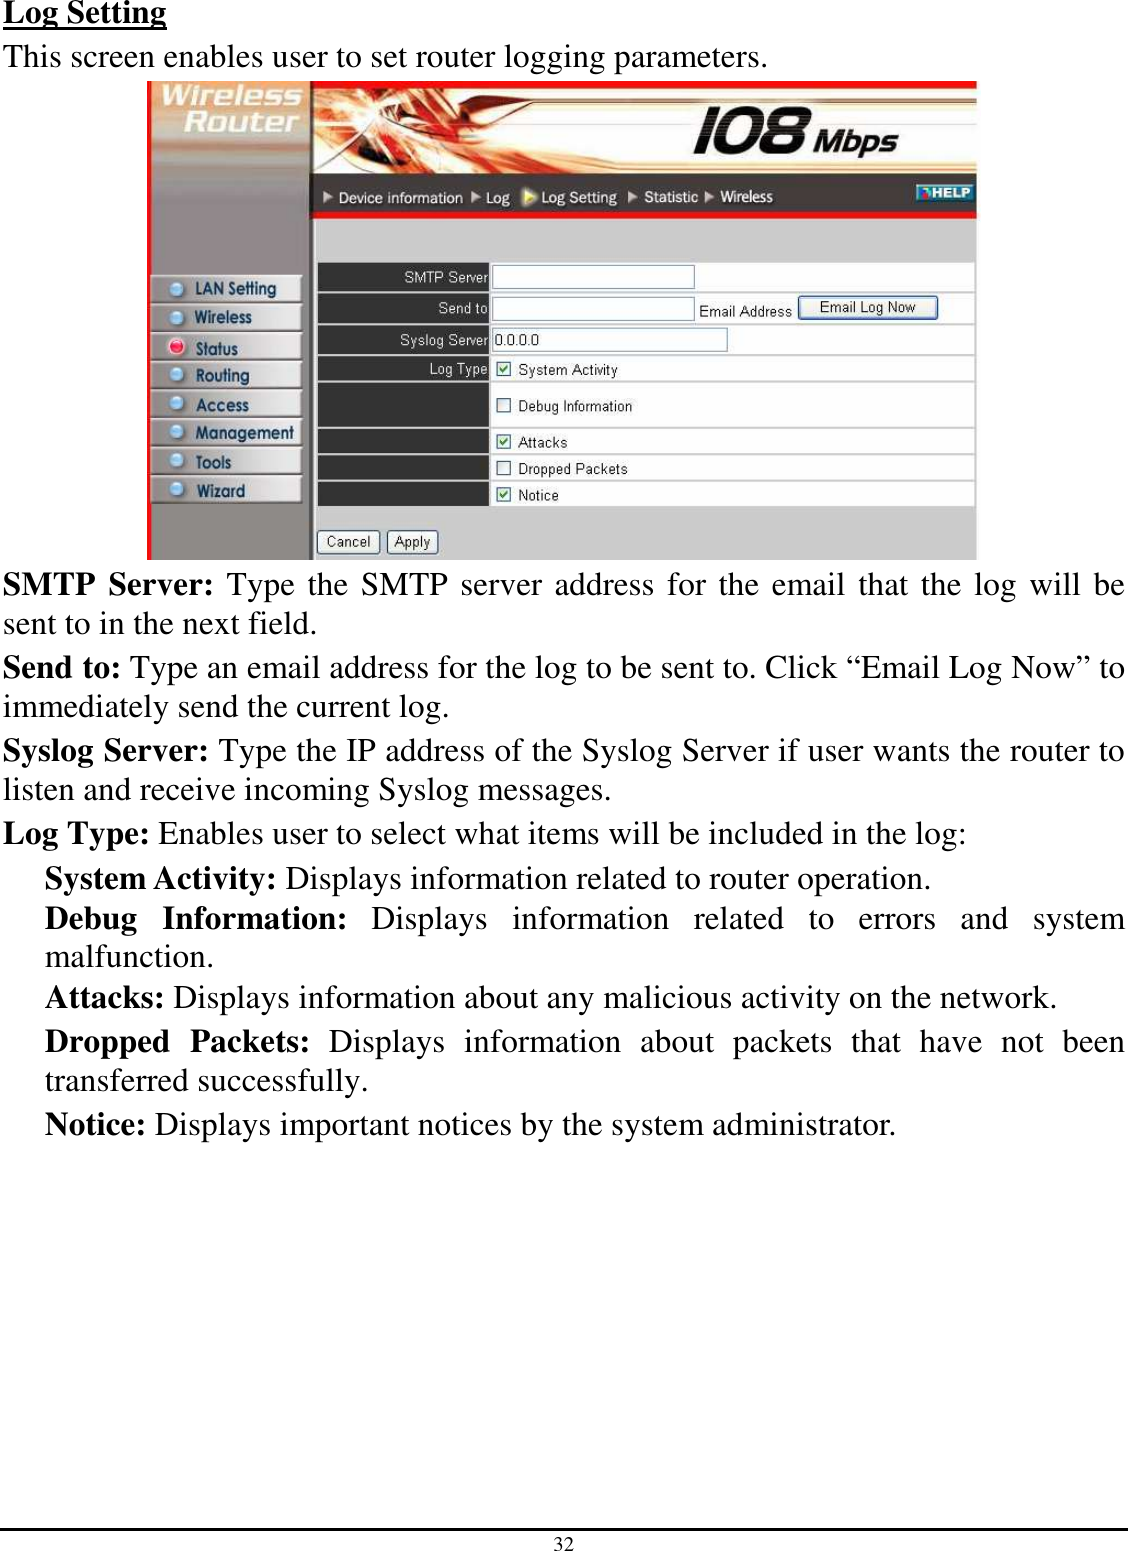 32 Log Setting This screen enables user to set router logging parameters.  SMTP Server: Type the SMTP server address for the email that the log will be sent to in the next field. Send to: Type an email address for the log to be sent to. Click “Email Log Now” to immediately send the current log. Syslog Server: Type the IP address of the Syslog Server if user wants the router to listen and receive incoming Syslog messages. Log Type: Enables user to select what items will be included in the log: System Activity: Displays information related to router operation. Debug  Information:  Displays  information  related  to  errors  and  system malfunction. Attacks: Displays information about any malicious activity on the network. Dropped  Packets:  Displays  information  about  packets  that  have  not  been transferred successfully. Notice: Displays important notices by the system administrator. 